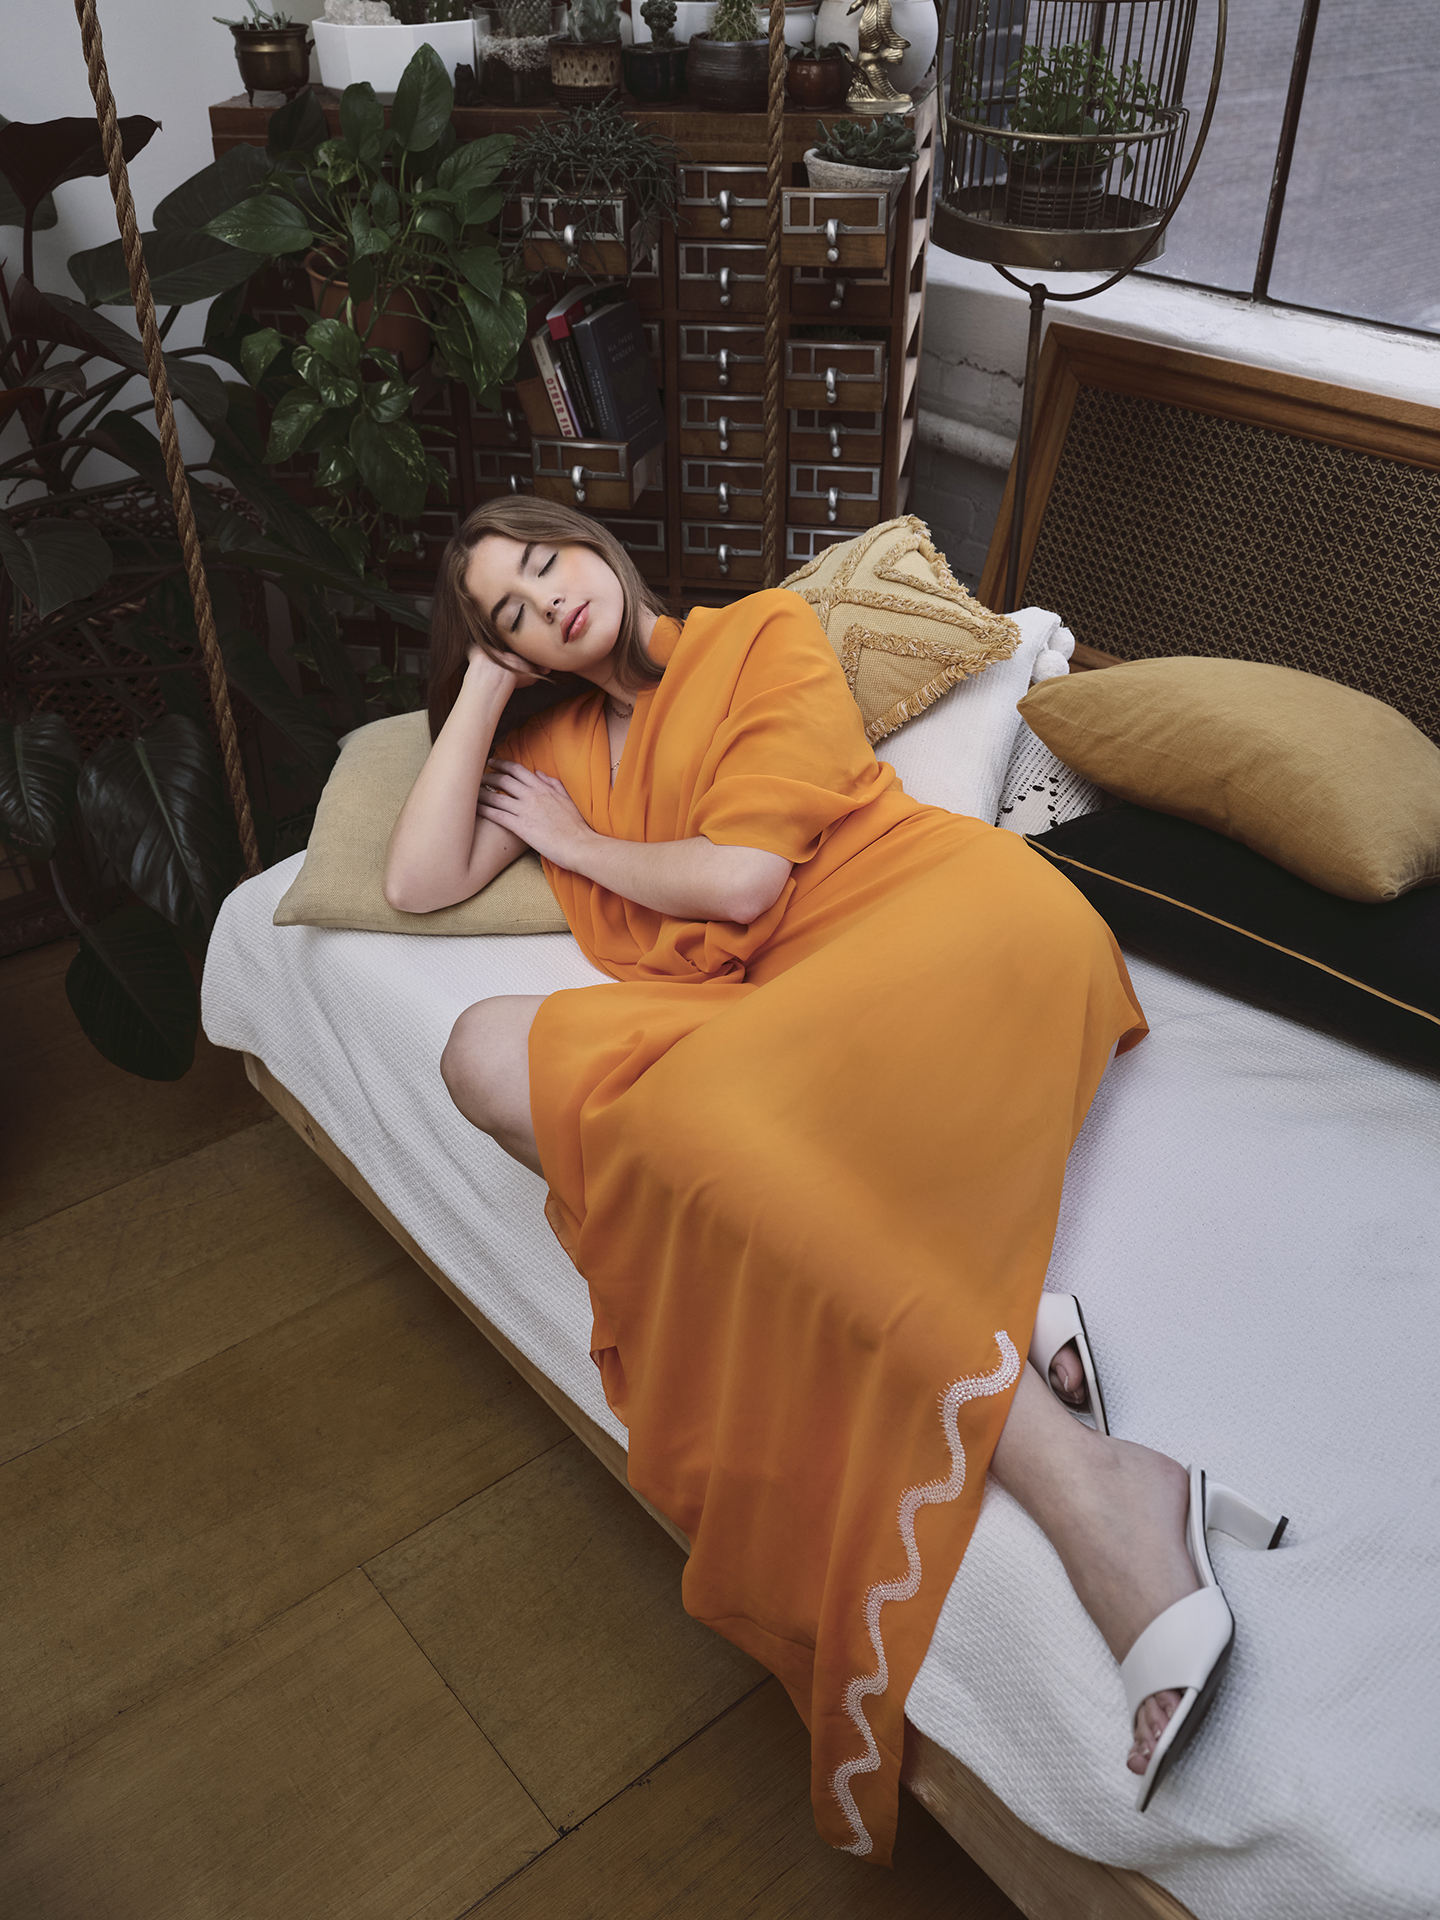 This image there is a Caucasian young woman laying down on a white sofa wearing an orange dress that flows off the bed. Behind her is a cupboard with plants and books. The Sofa is covered in pillows ranging in size and color between gold, green, and white. The young woman is laying with her eyes closed, presumably asleep